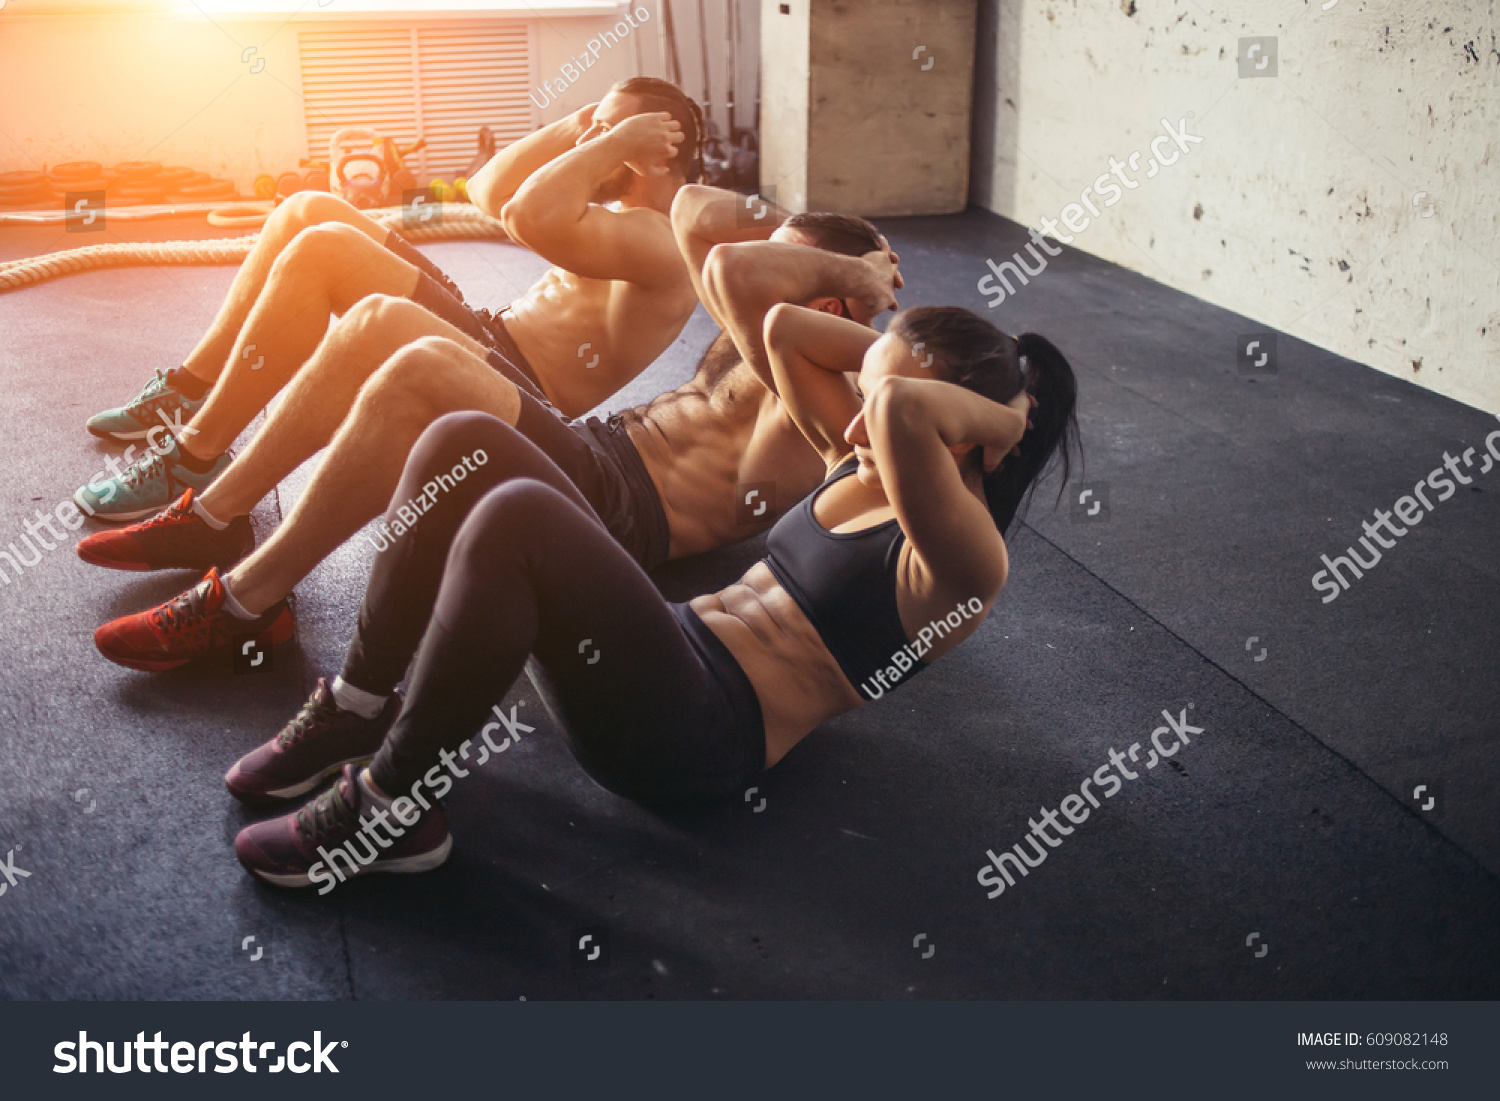 Group of athletic adult men and women performing sit up exercises to strengthen their core abdominal muscles at fitness training #609082148